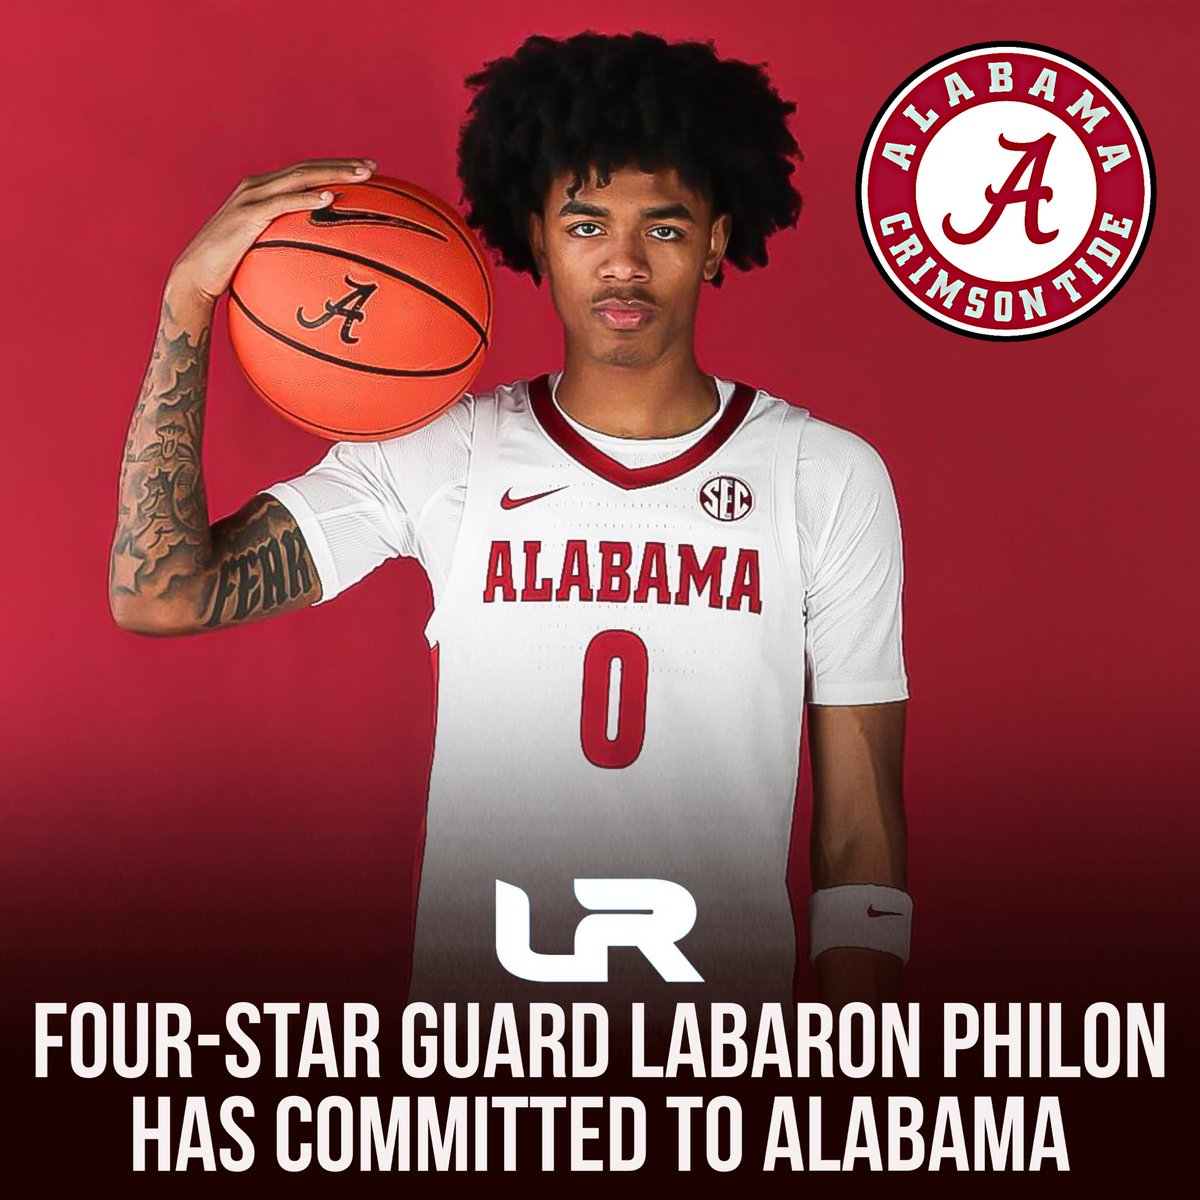 NEWS: 2024 4⭐️ Labaron Philon has committed to Alabama and Nate Oats, source told @LeagueRDY. Philon is an electric combo guard who can score the ball from all over the floor. A committed, tough defender who had a great senior season for @LinkHoops. Former Auburn and Kansas…